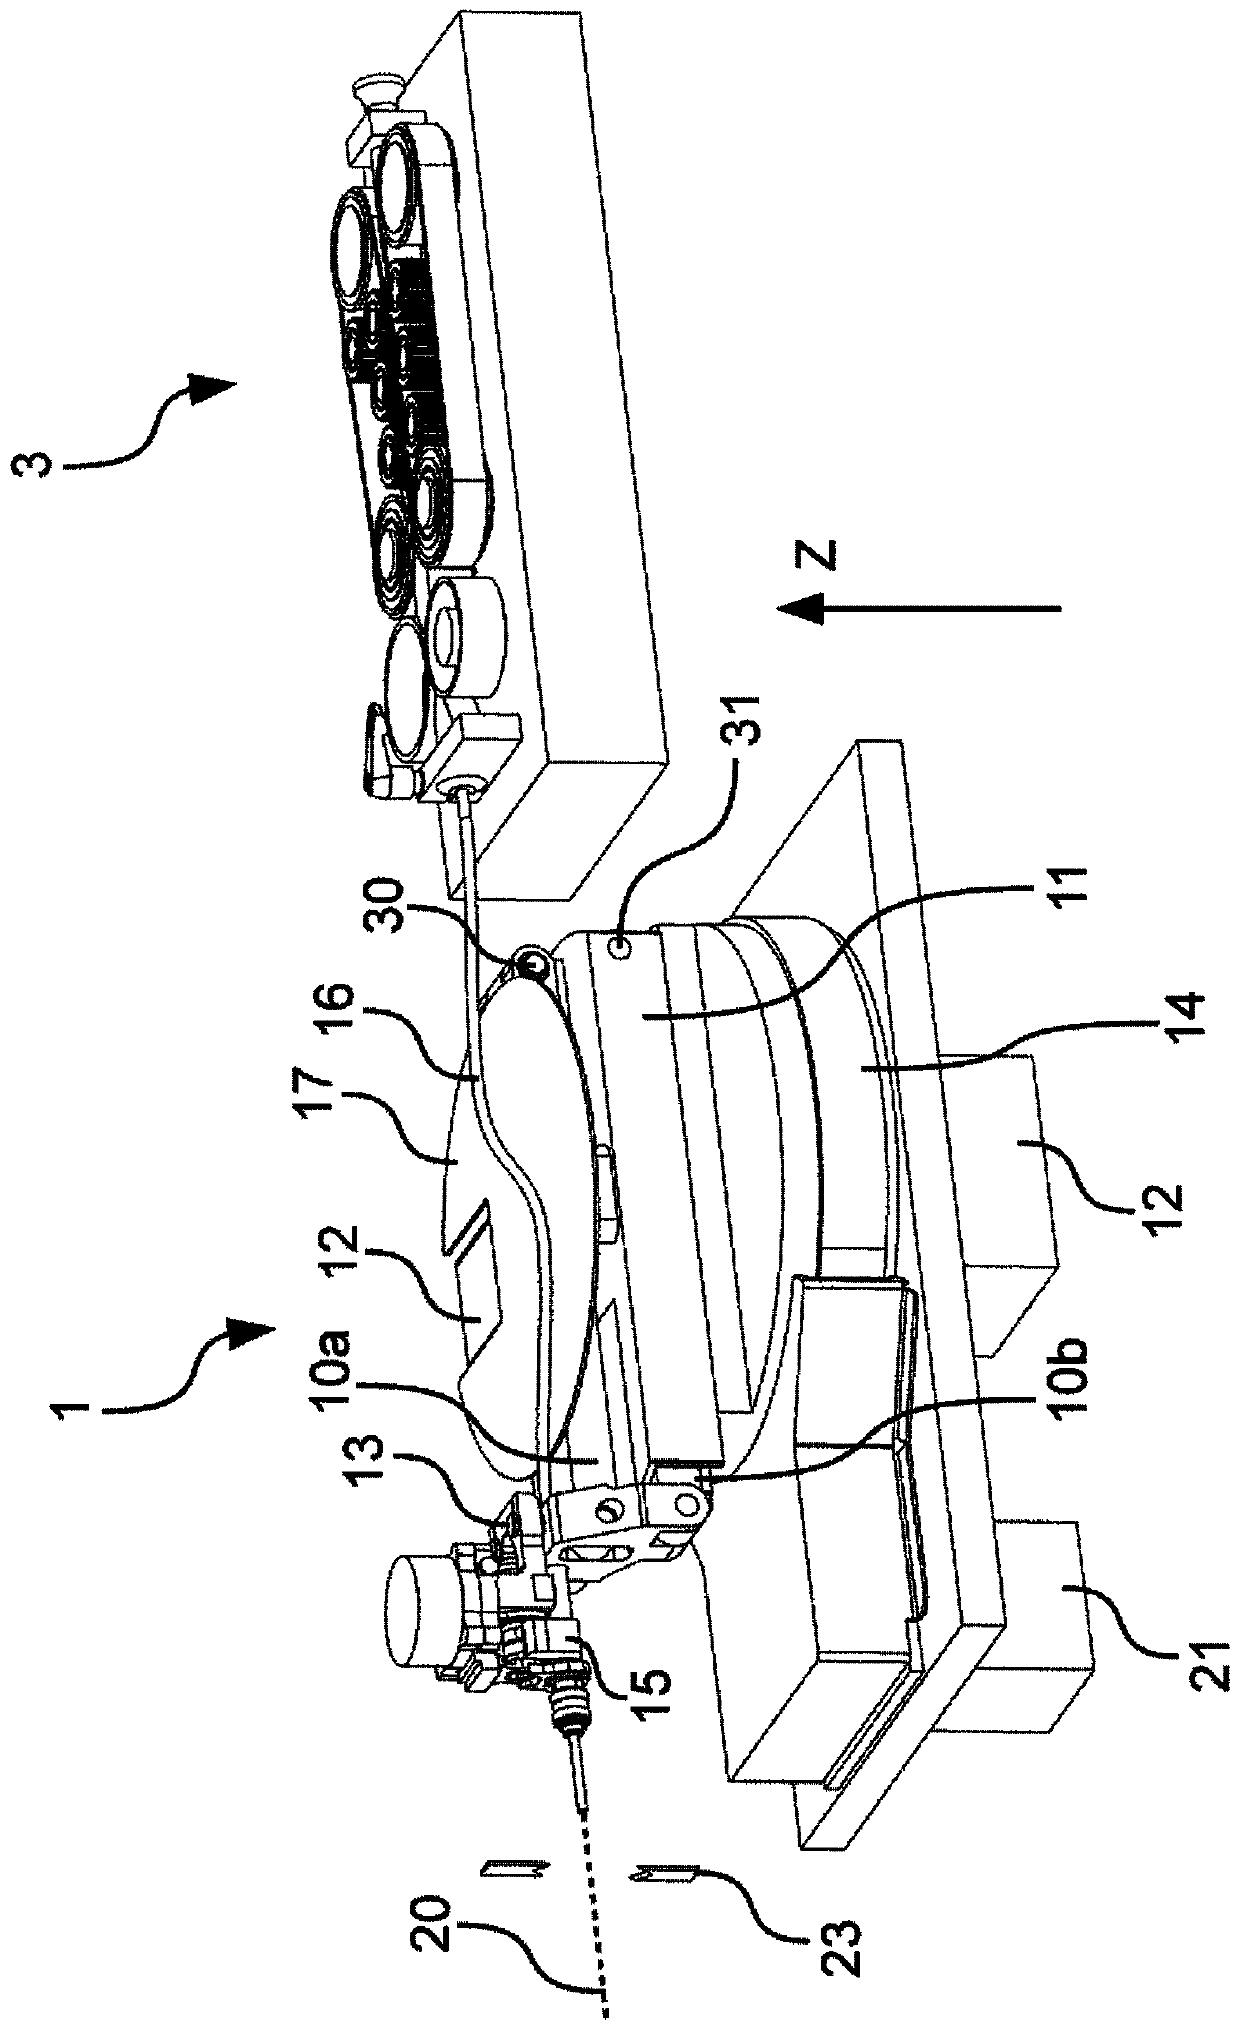 Cable end holding device for holding cable end, method for positioning cable end of cable, and cable bundling machine